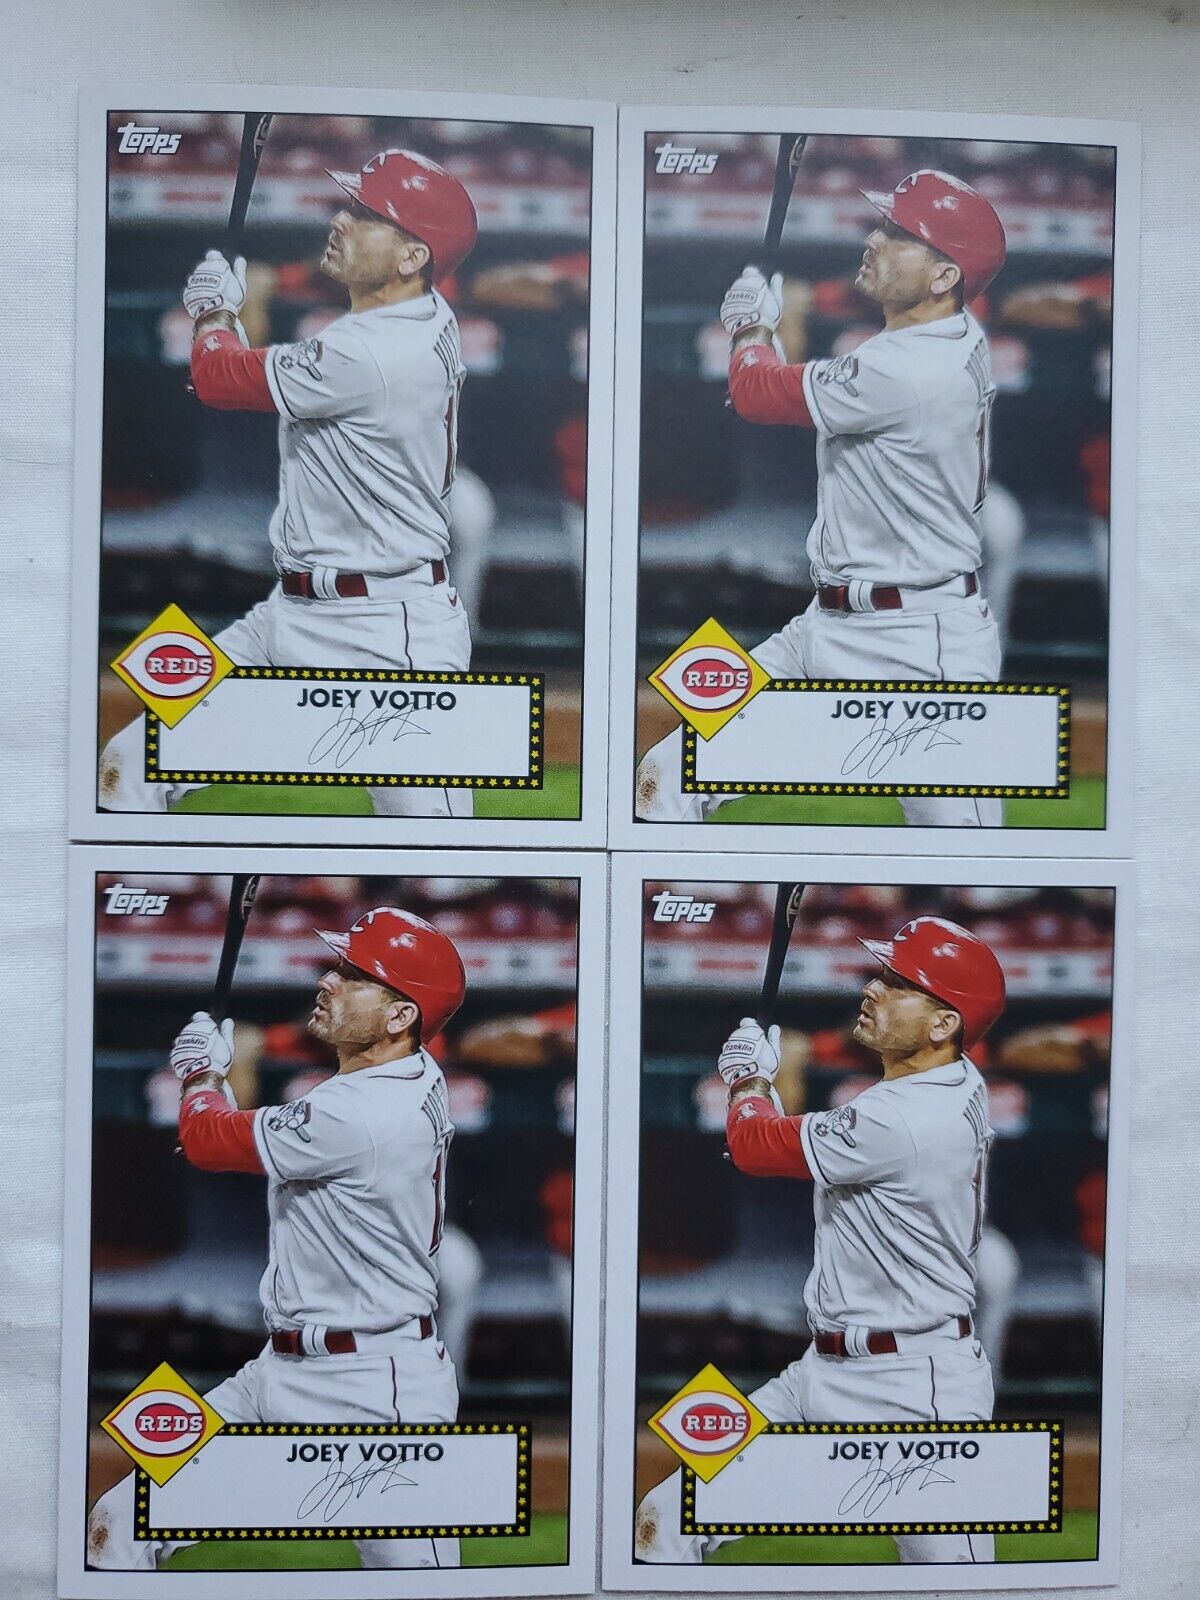 2021 Topps series 1 Joey Votto 4 Card lot.  #T5248